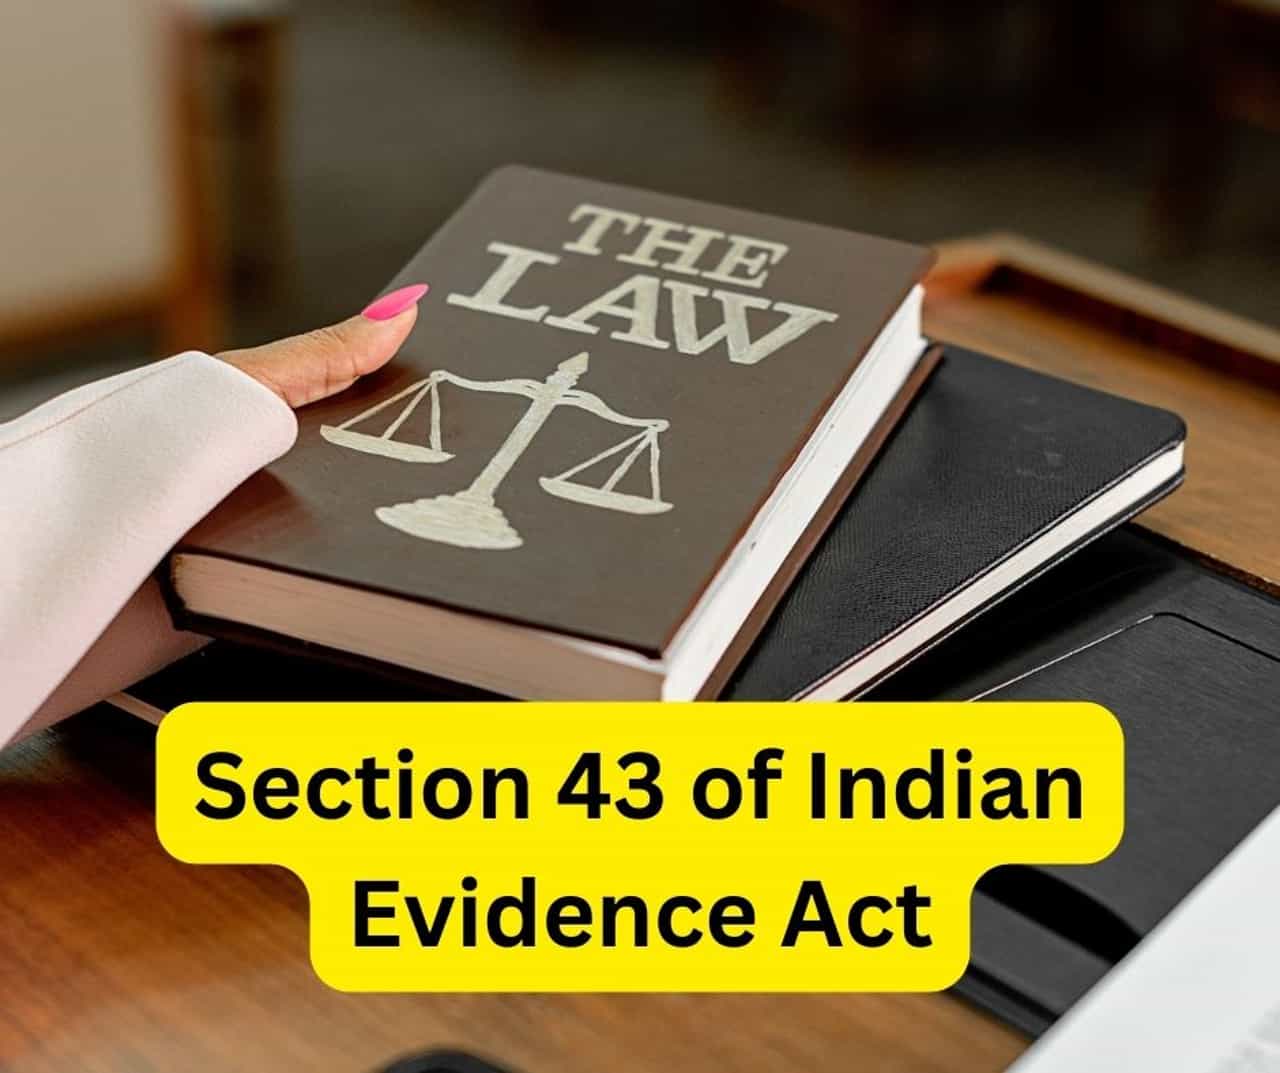 Section 43 of Indian Evidence Act.